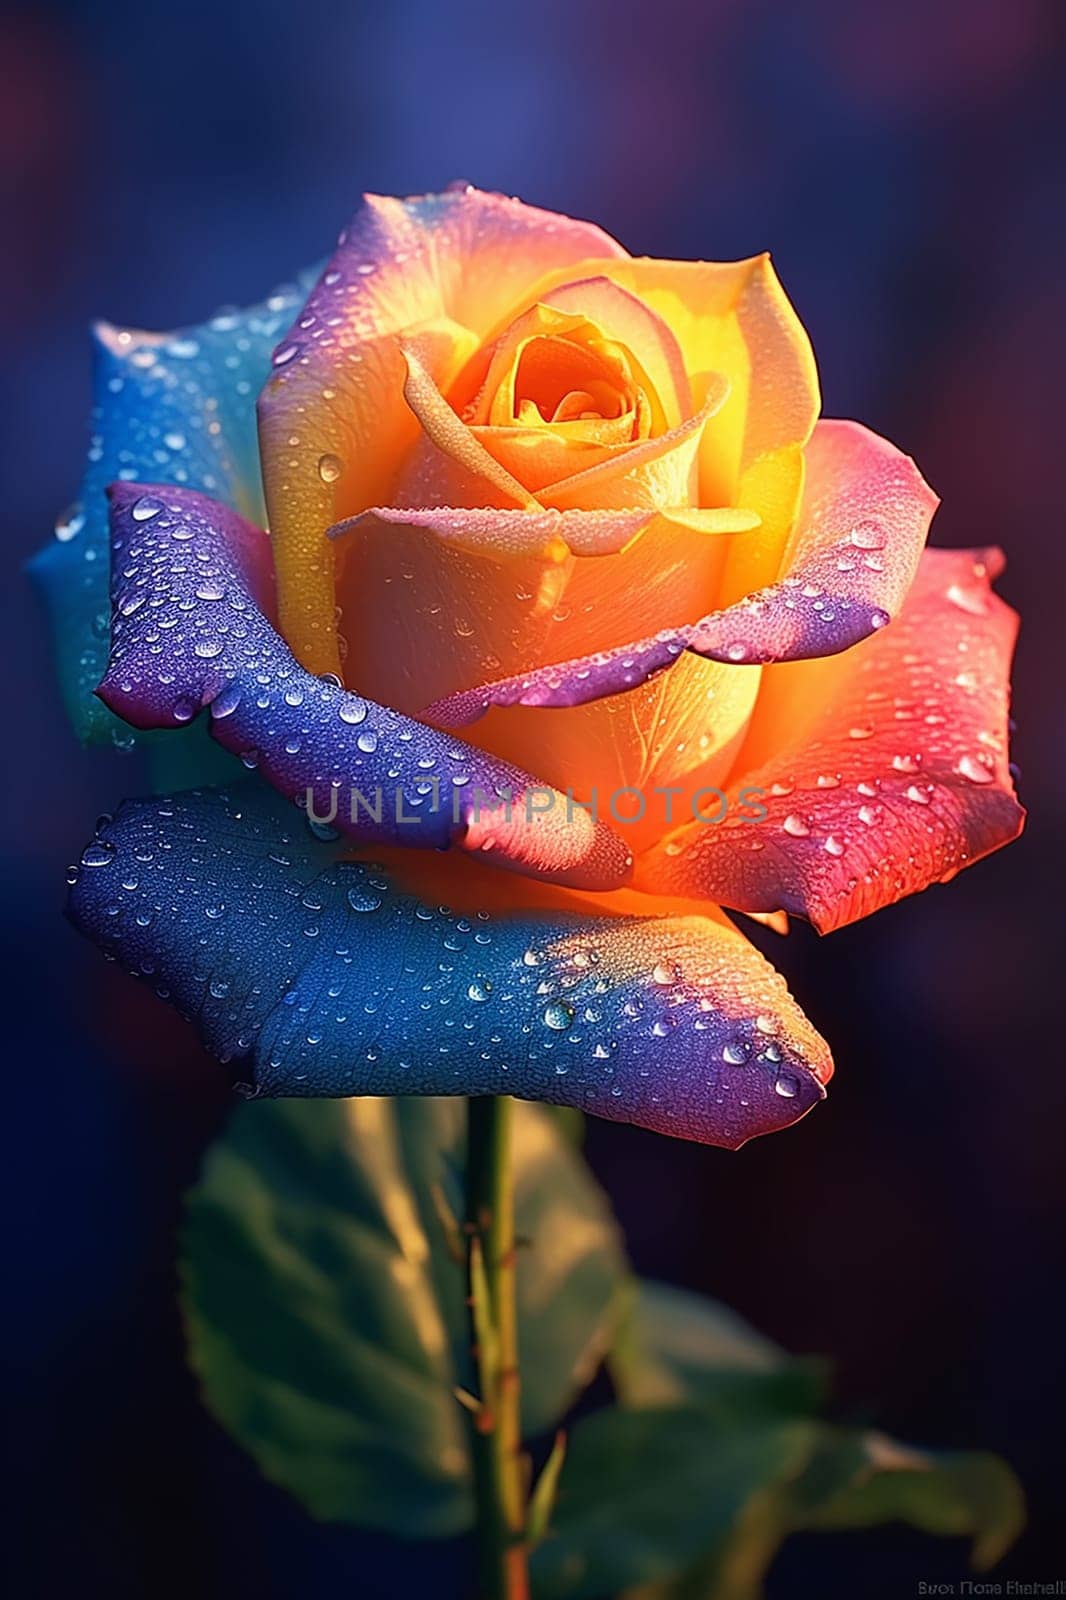 A rose with rainbow color on petals, colorful flower